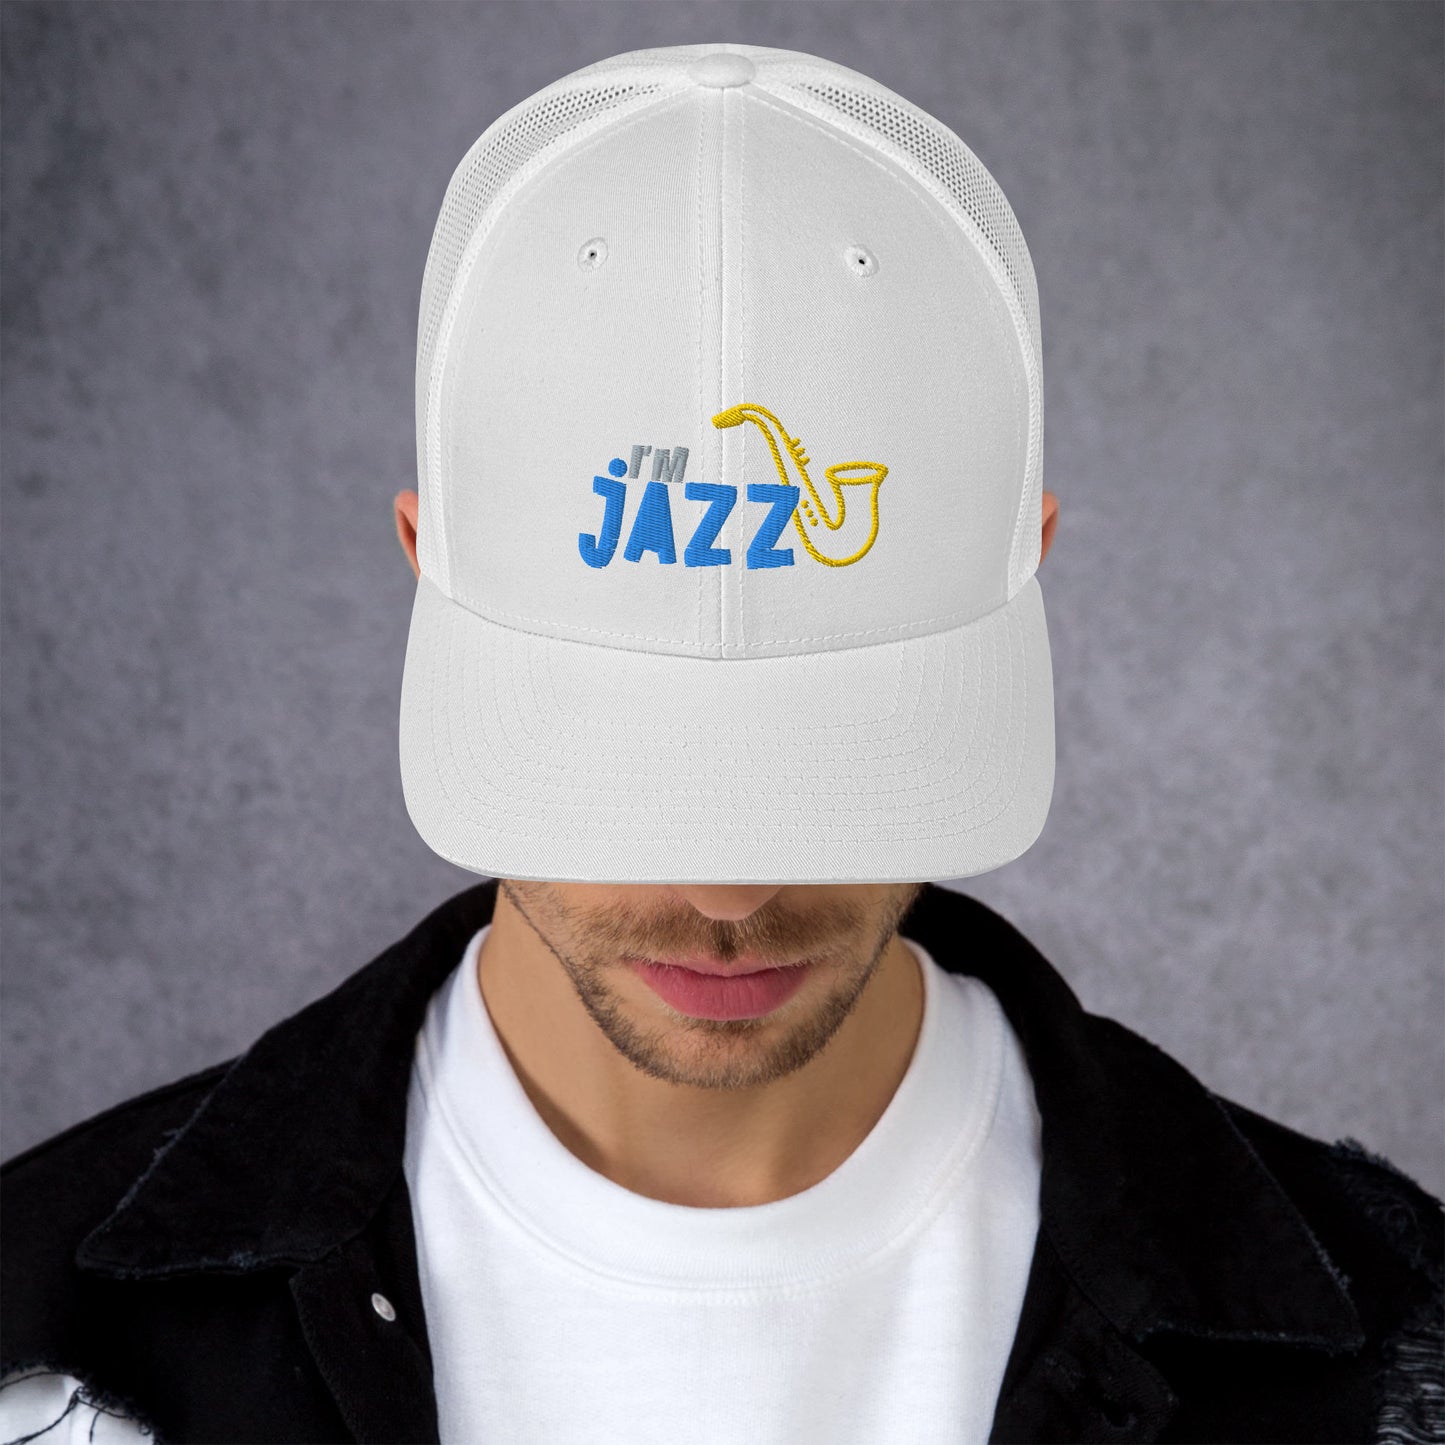 I'M JAZZ Trucker Cap (multiple colors available)